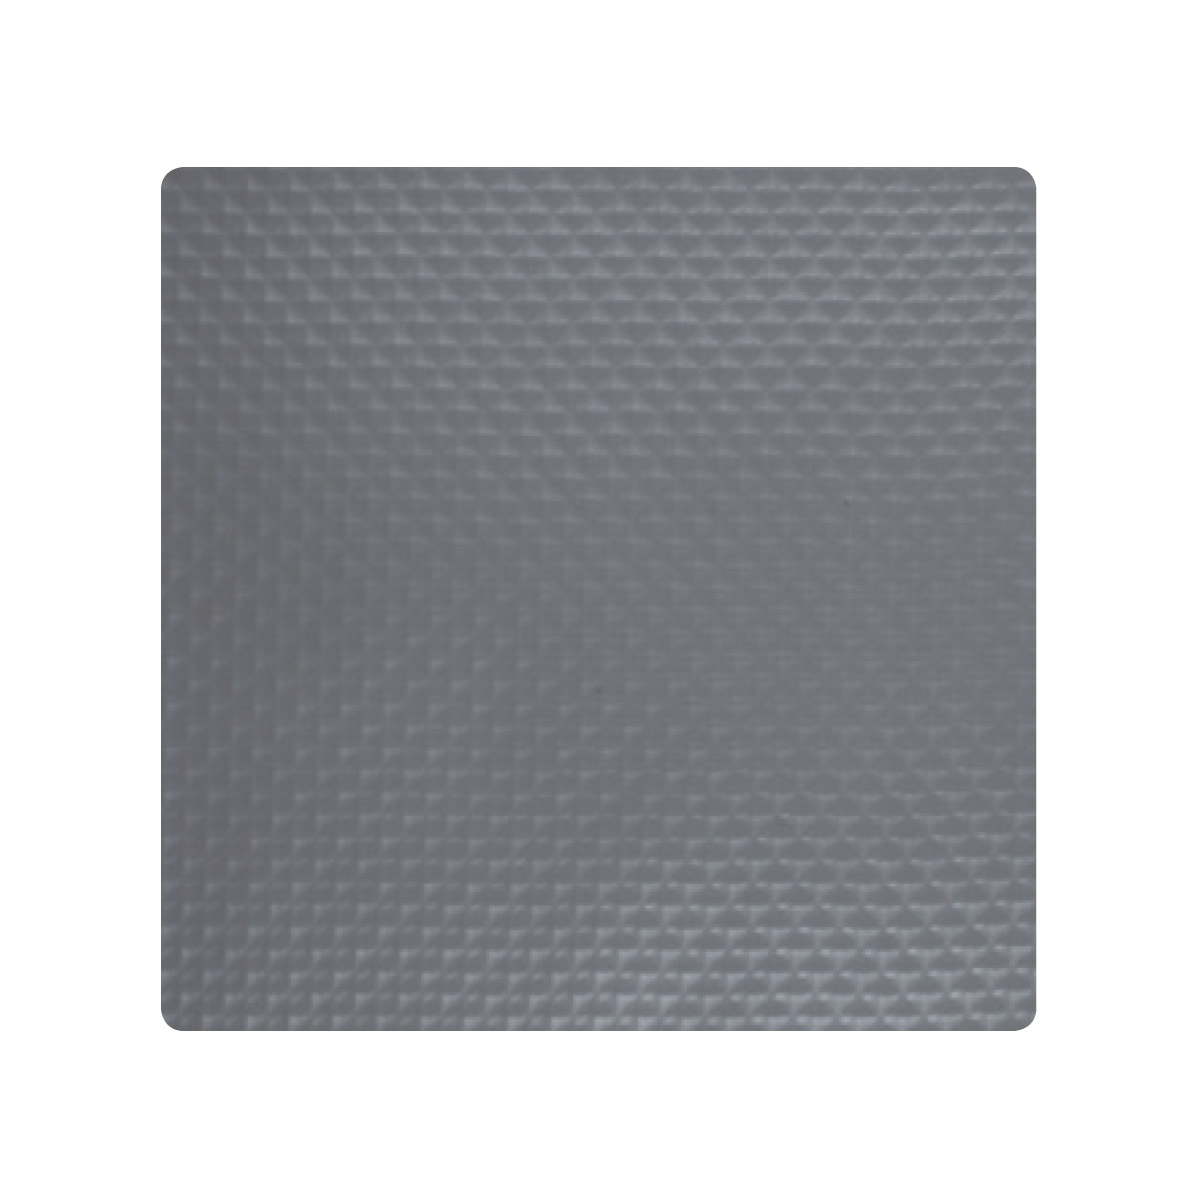 PVC natural pool liner deluxe, reinforced, light grey, 1,5mm, 165 cm, l=25 m PVC natural pool liner deluxe, reinforced, light grey, 1,5mm, 165 cm, l=25 m